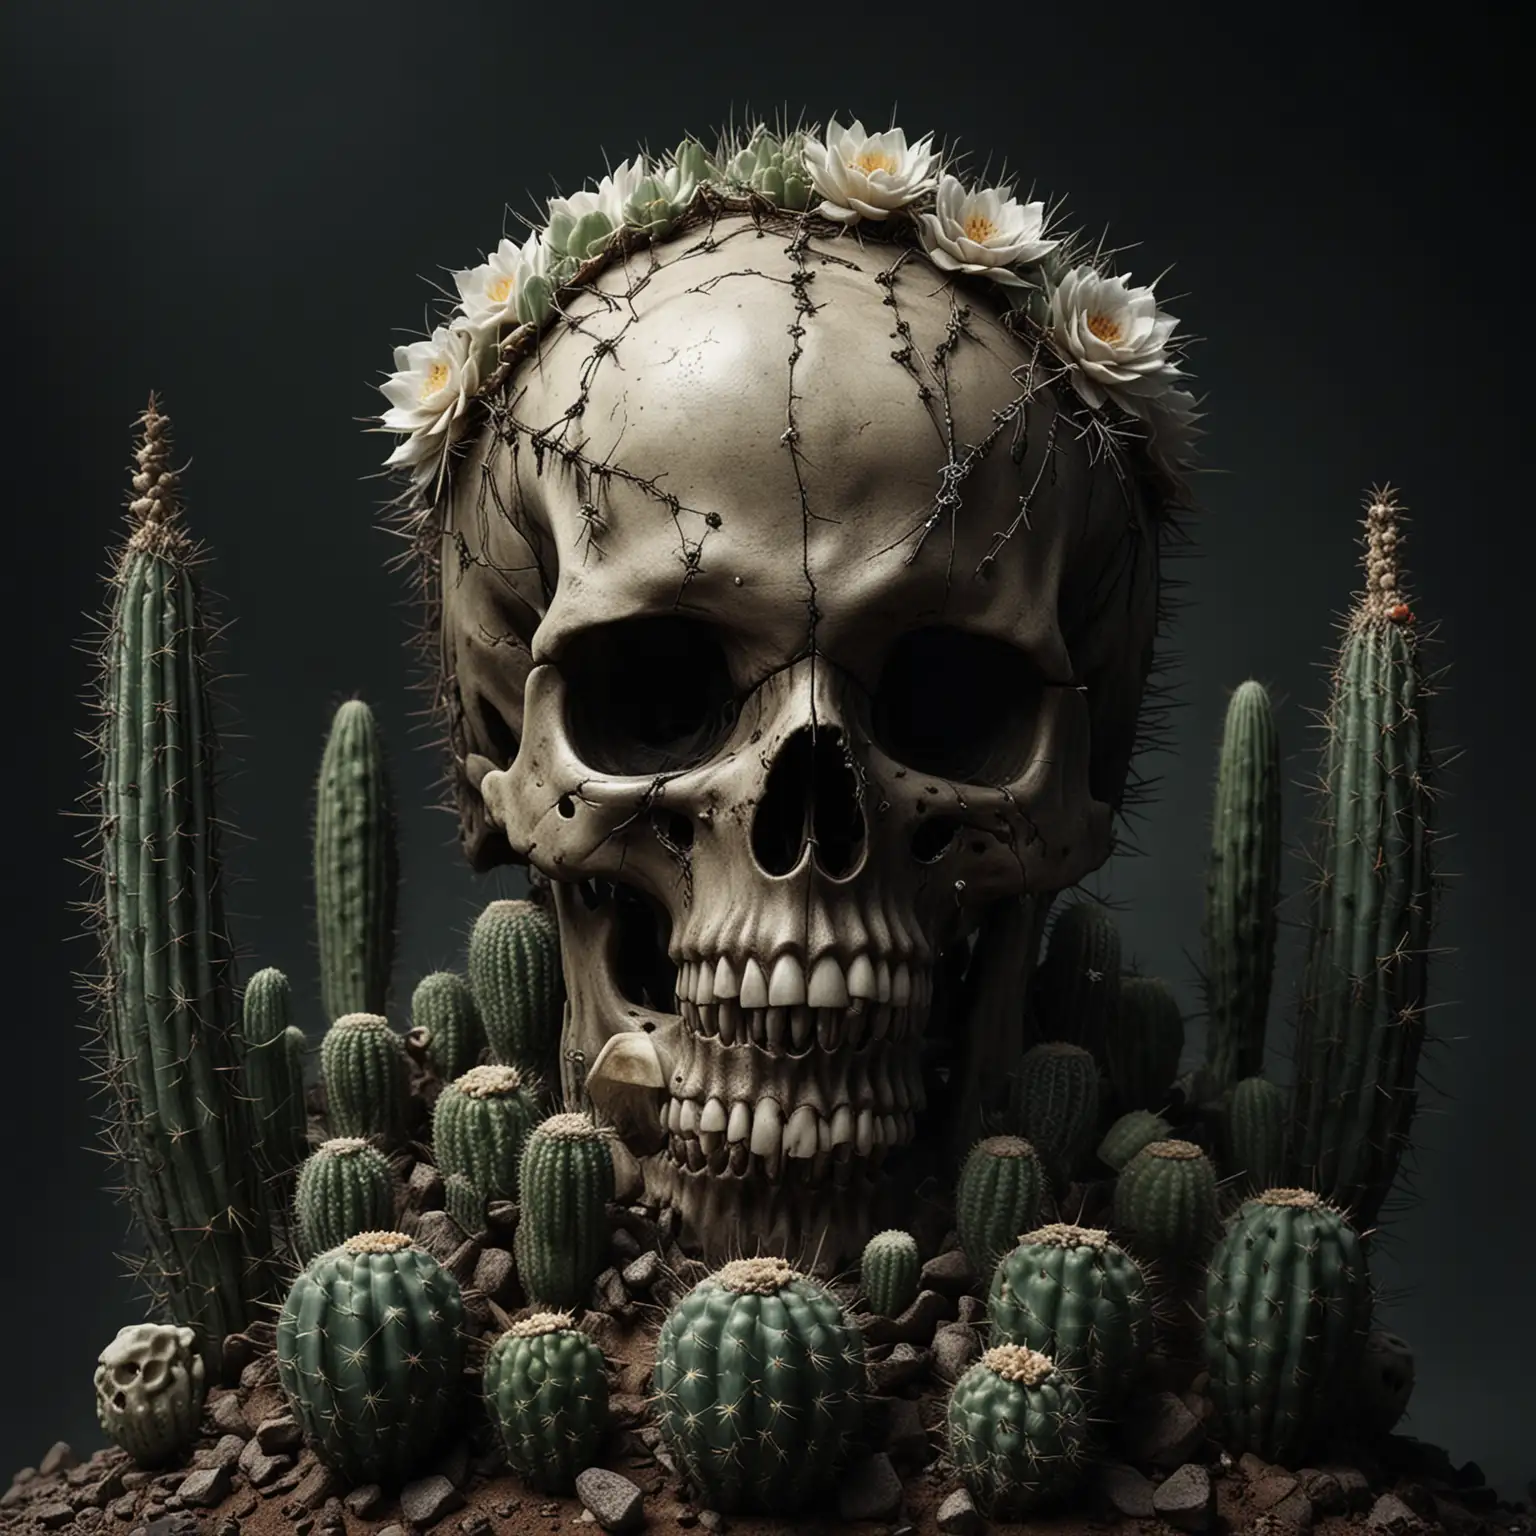 Sinister Skull with Monstrous Fangs and Twisted Cactus Growth